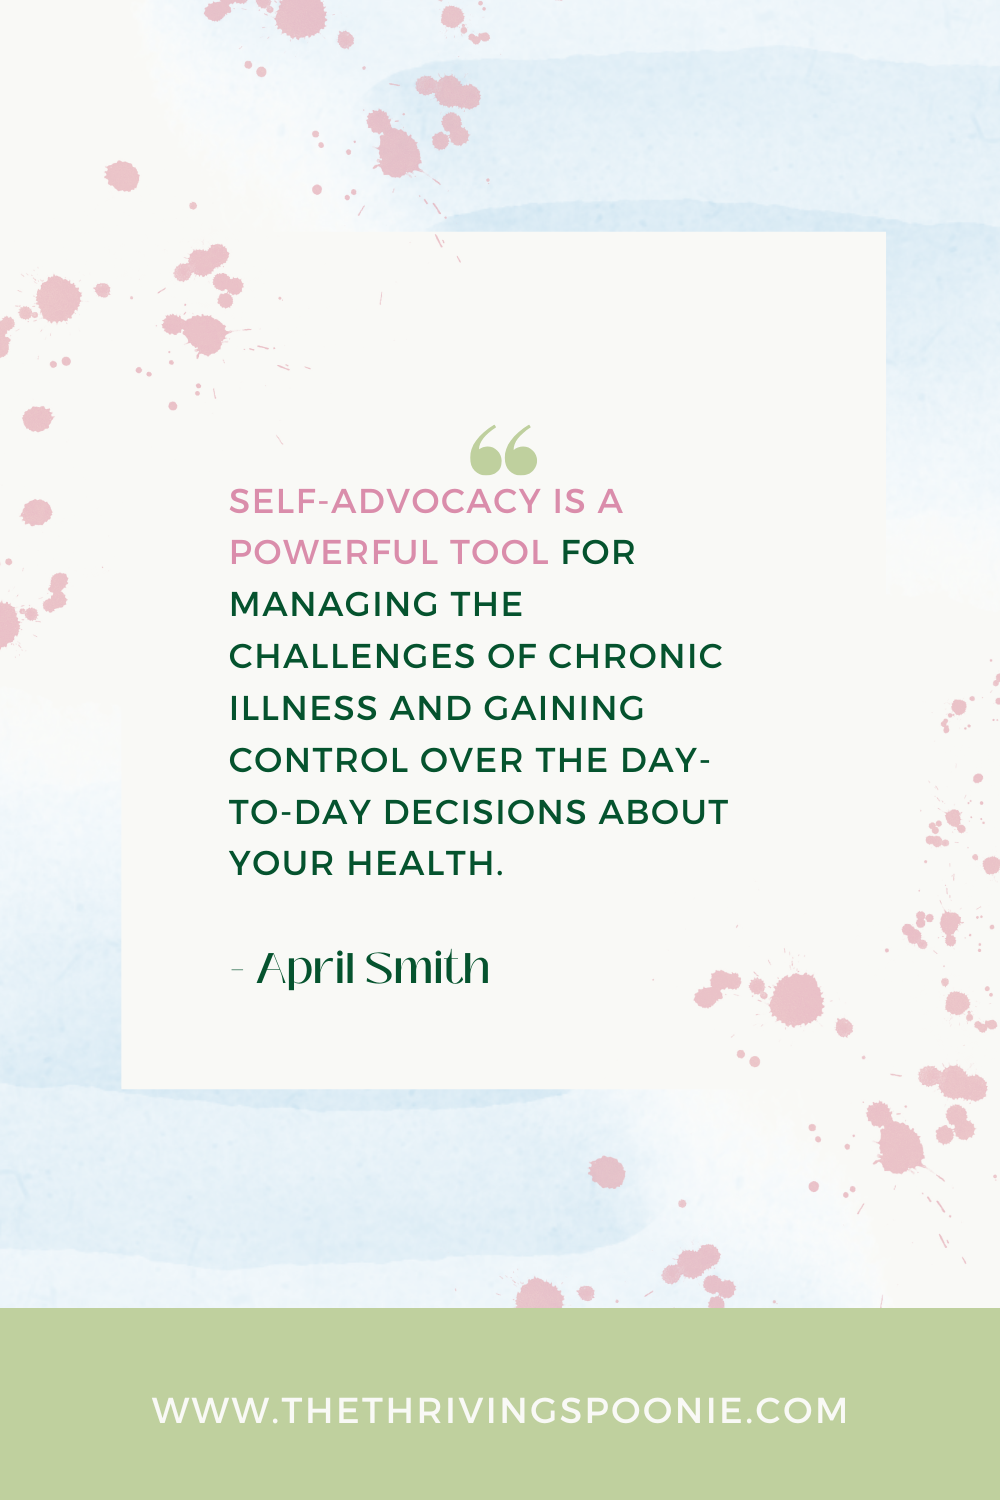 This beginner's guide provides you with the tools you need to understand and utilize self-advocacy for chronic illness. Get started today!